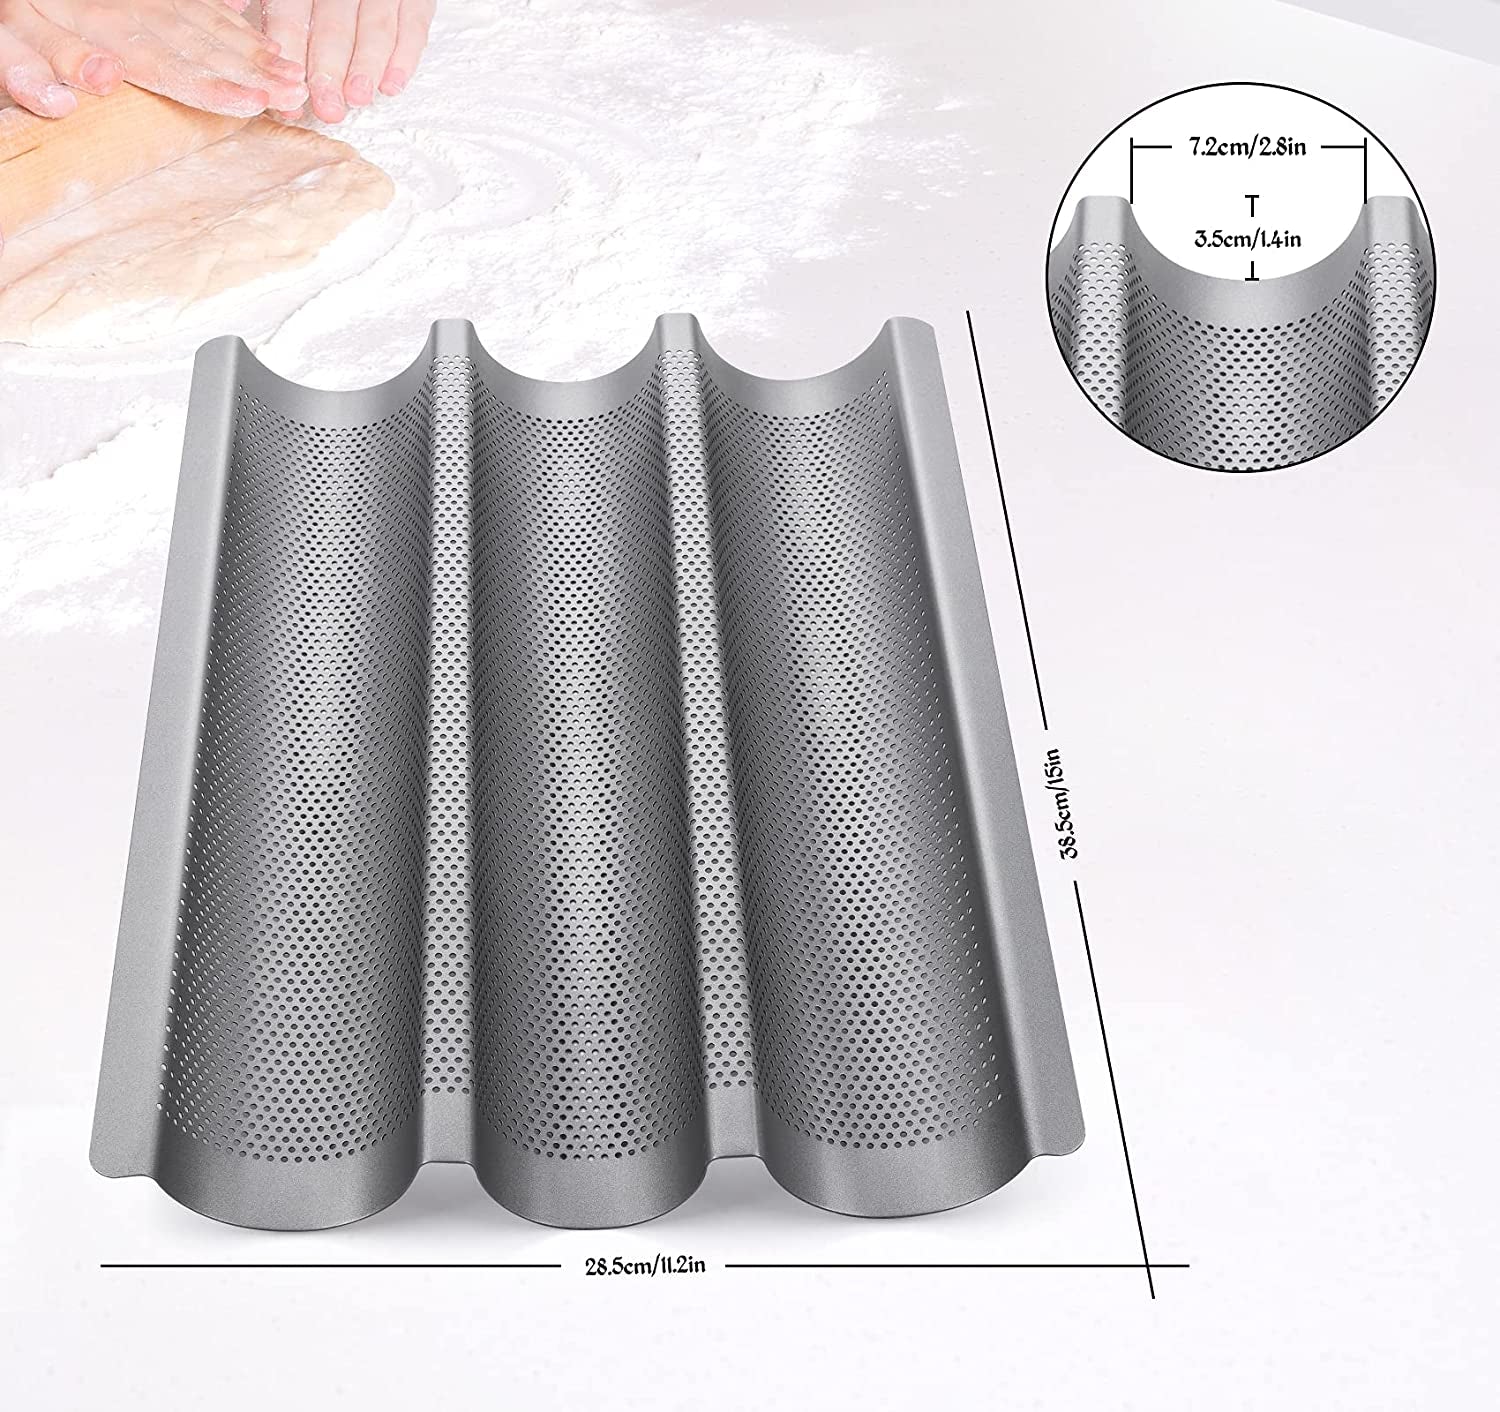 Perforated Baguette Baking Tray Non Stick French Stick Loaf Baking Molds Pan for 3 Baguettes (Silver)